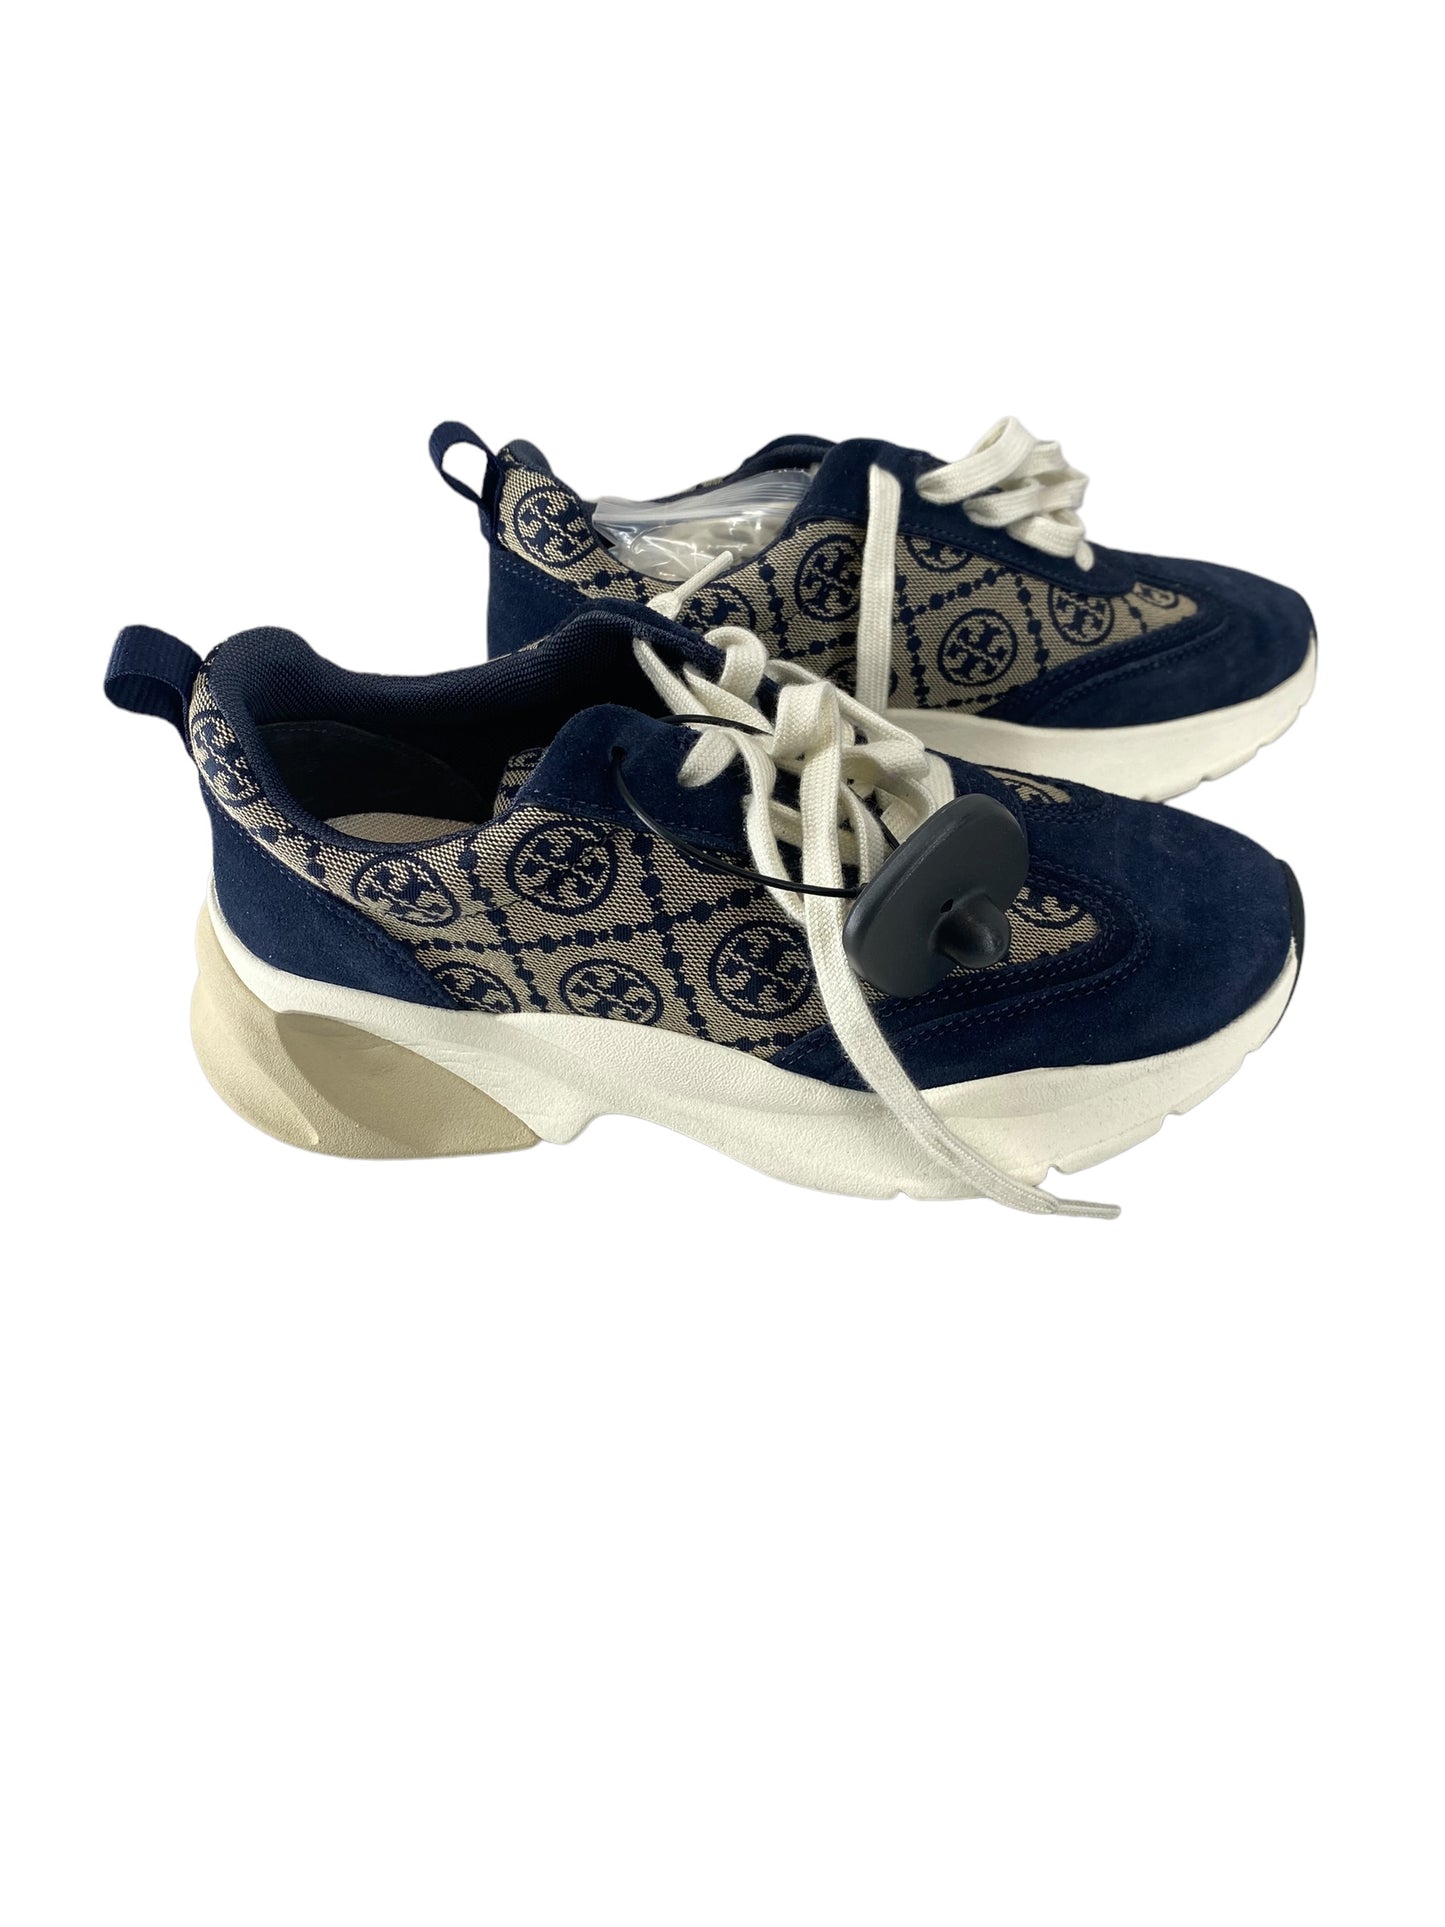 Shoes Athletic By Tory Burch  Size: 7.5